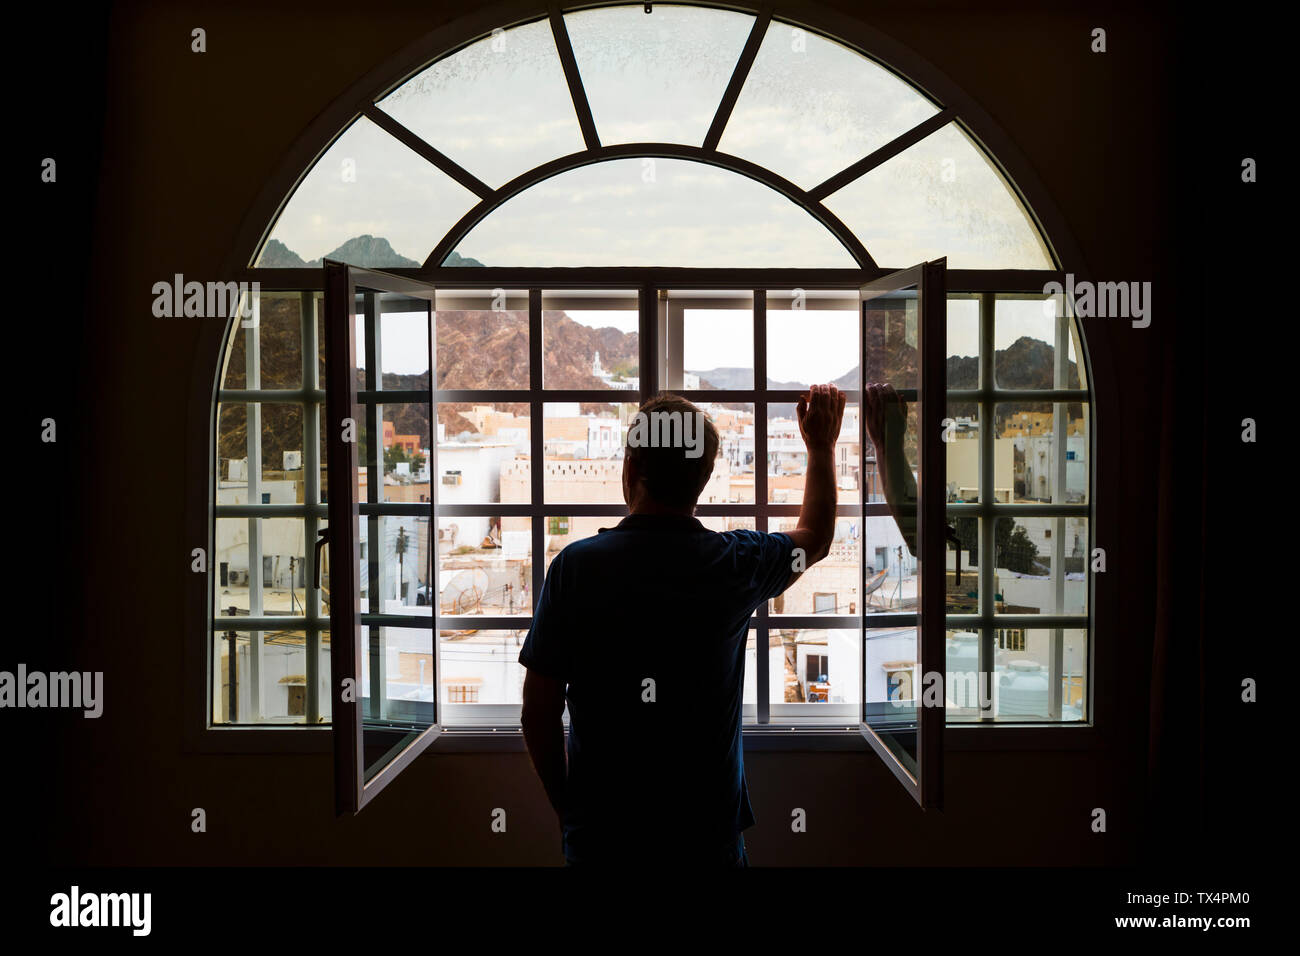 Man standing looking out of open window, Mutrah, Oman Stock Photo